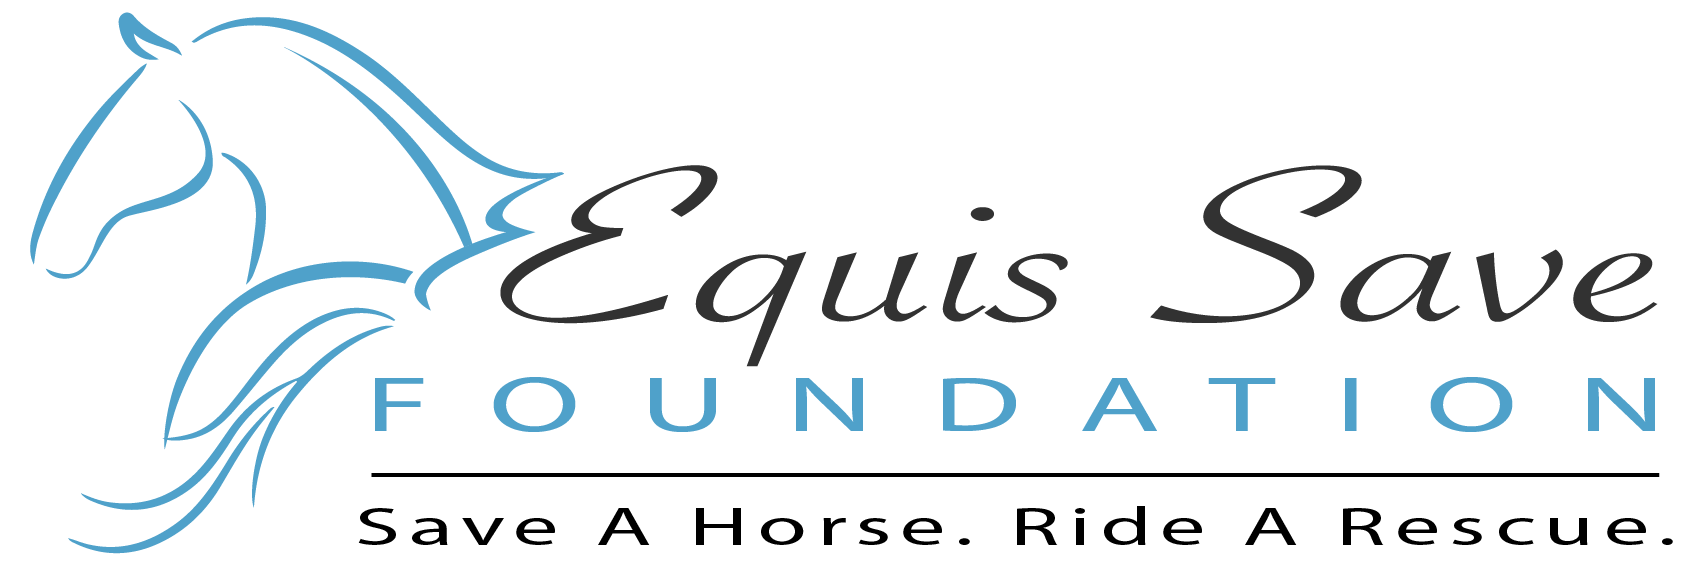 equis save logo with tagline-01